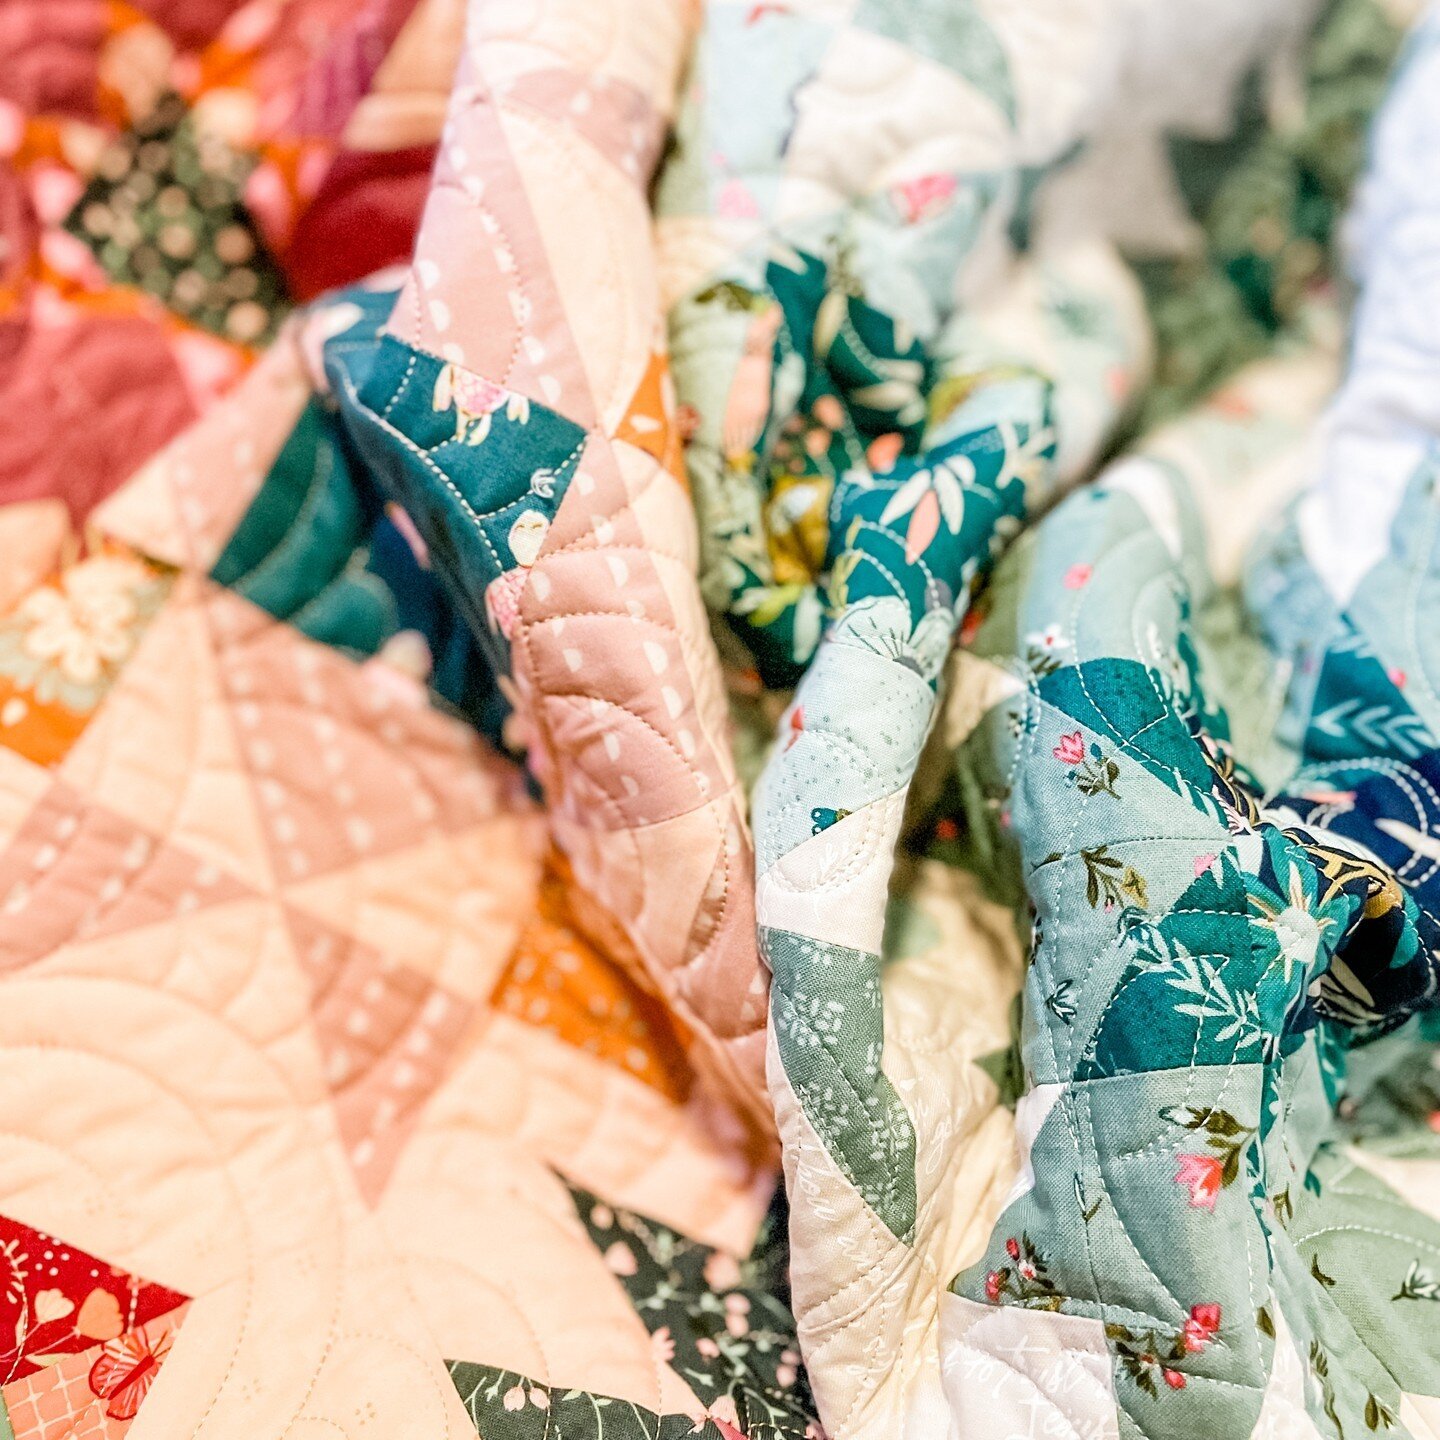 Have you heard the news?! I&rsquo;ve teamed up with my friend Lisa @wildplumlane.quilts for some summer fun!

We&rsquo;ve planned an amazing weekend quilt retreat from June 30-July 3, 2023 in Kansas City, Missouri, and we would LOVE to have you join 